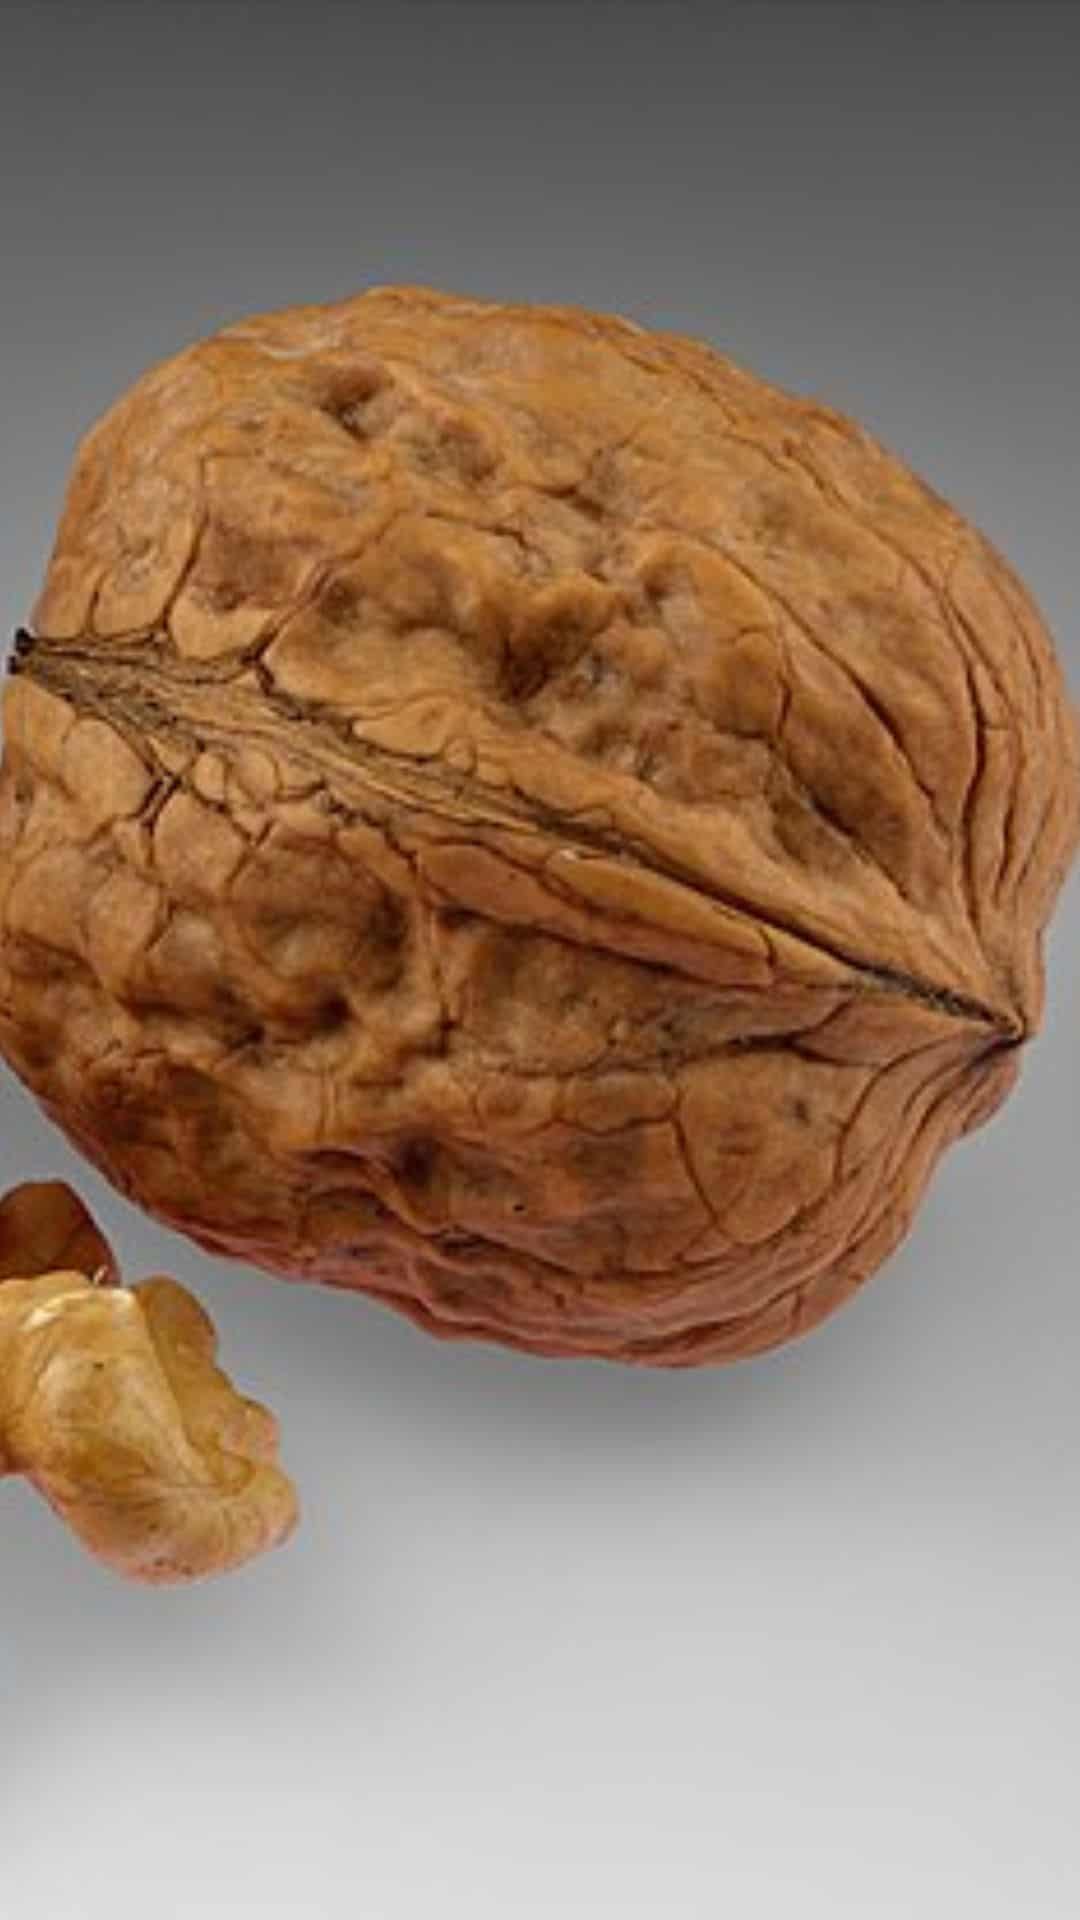 8 Reasons To Add Walnuts To Your Diet